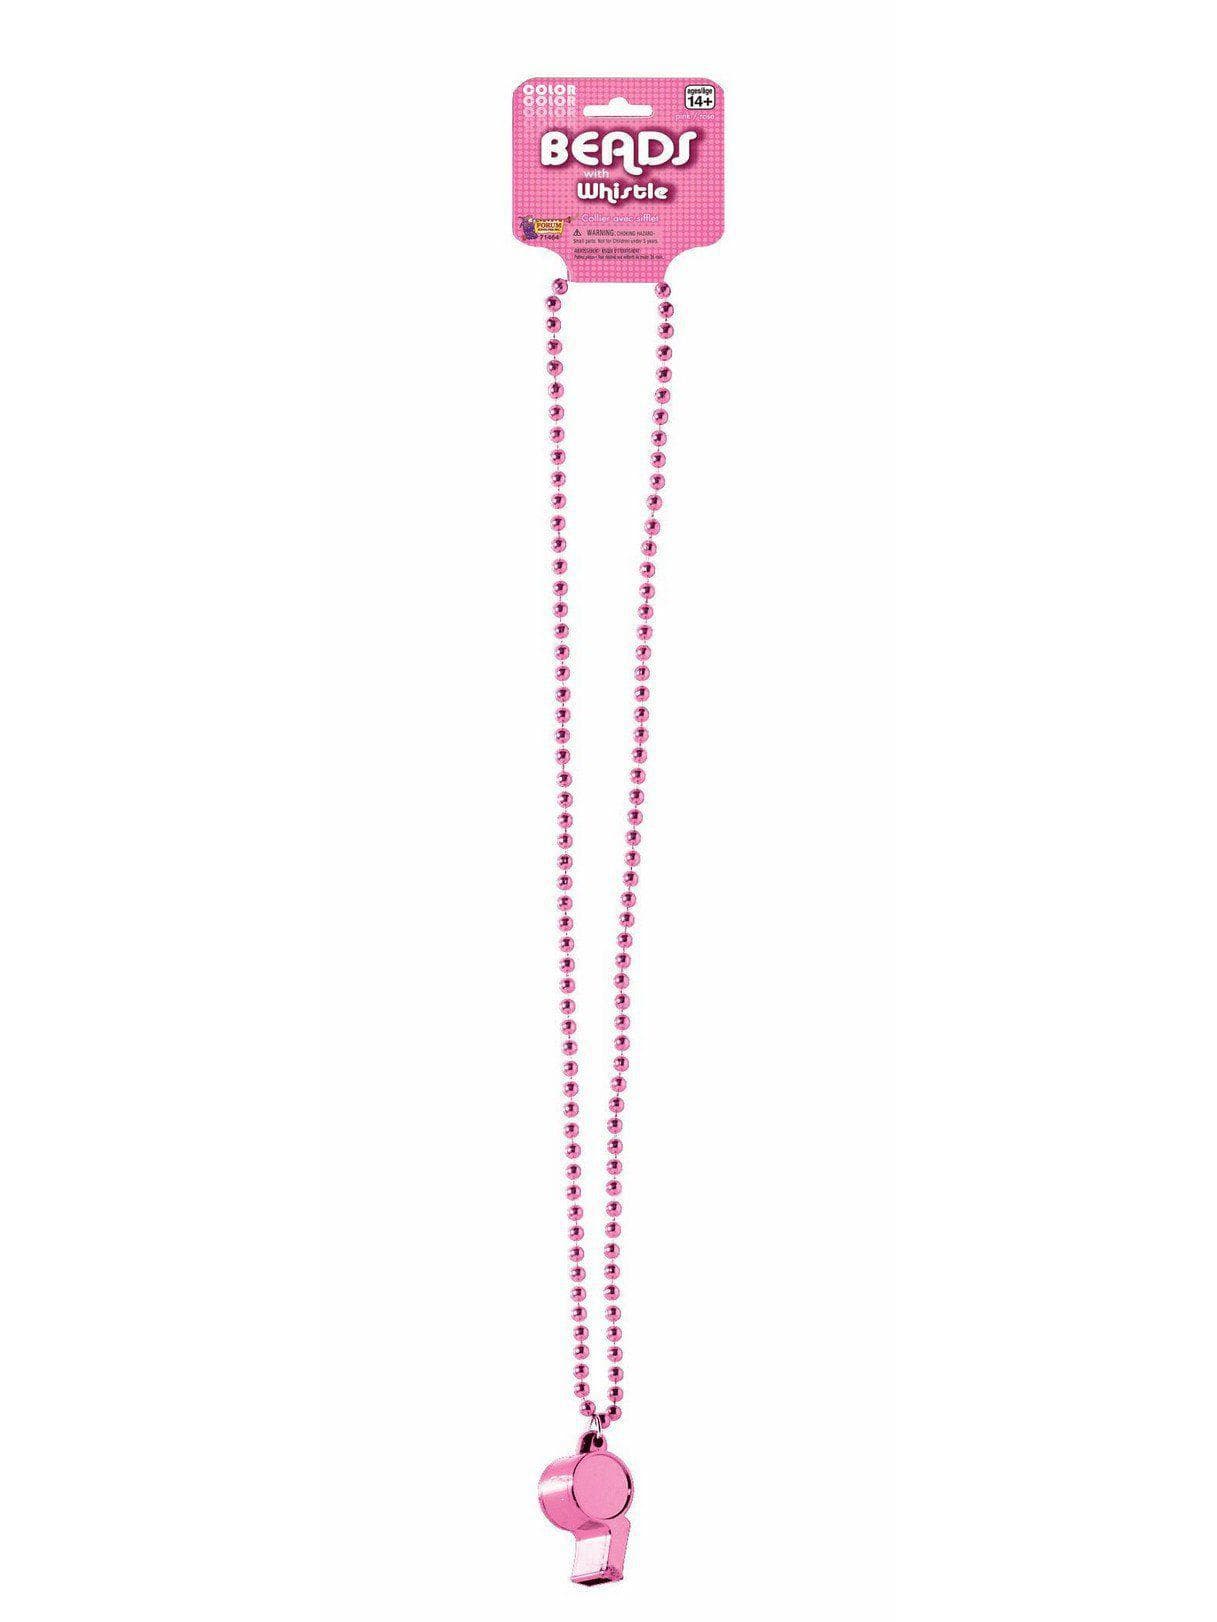 Adult Pink Bead Necklace with Whistle - costumes.com